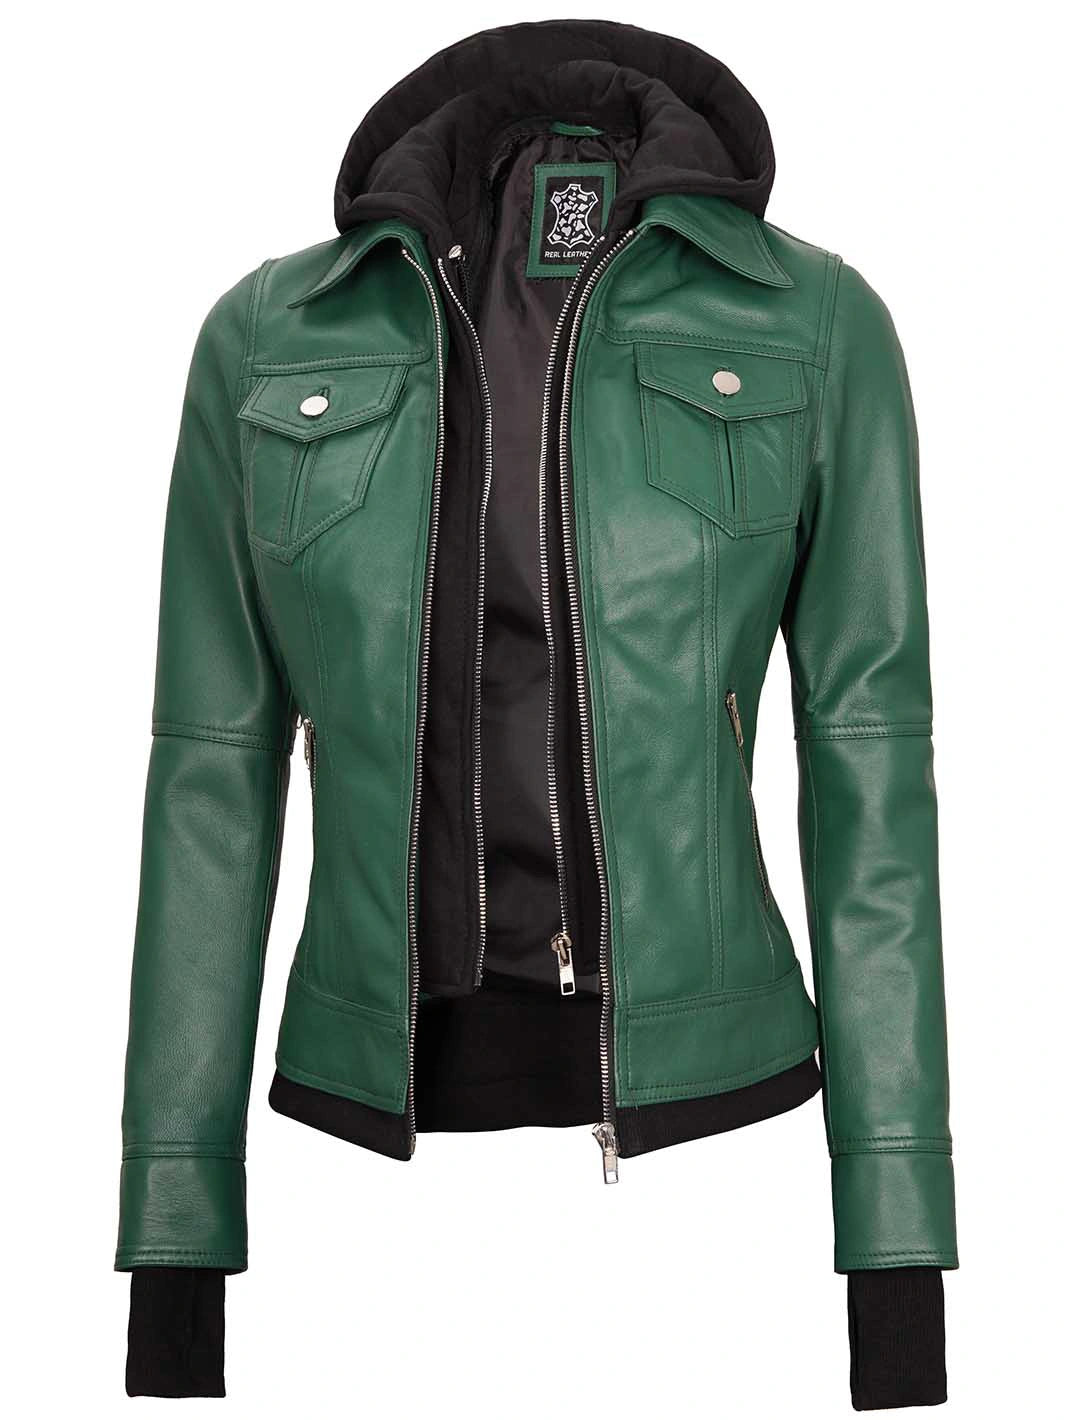 Womens green leather jacket